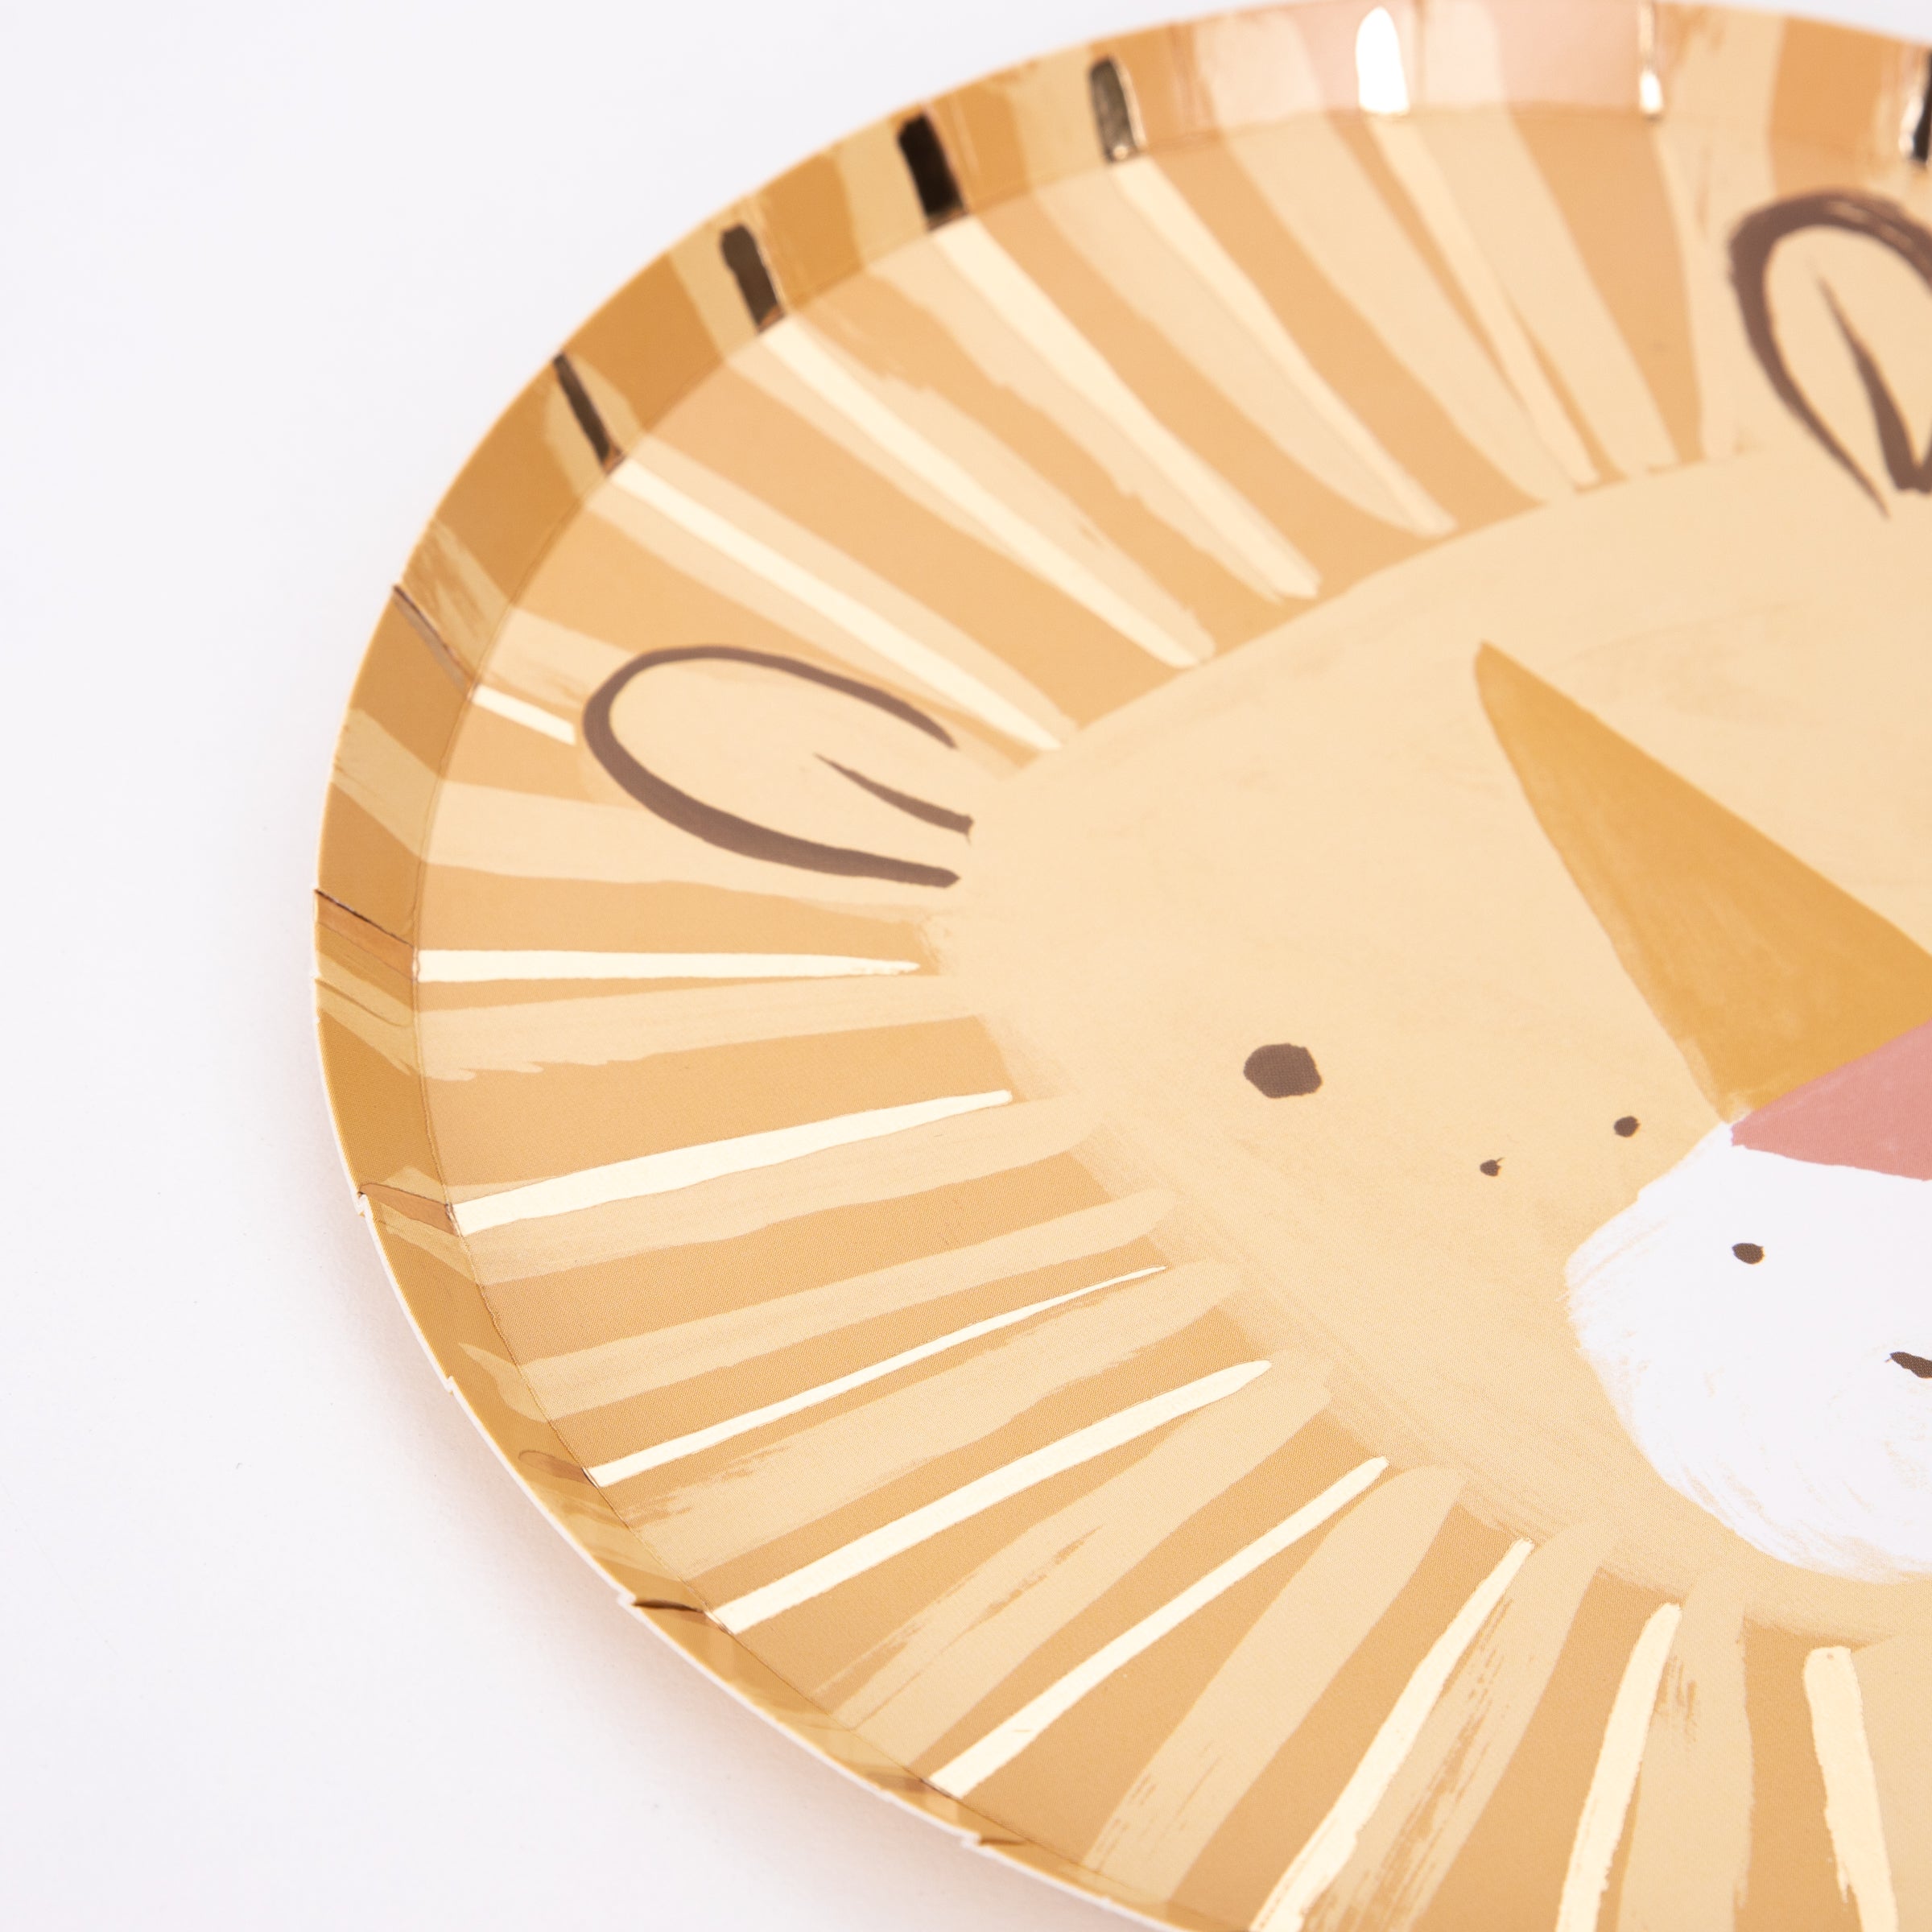 Our party plates, shaped like a lion, are fabulous for a animal party.